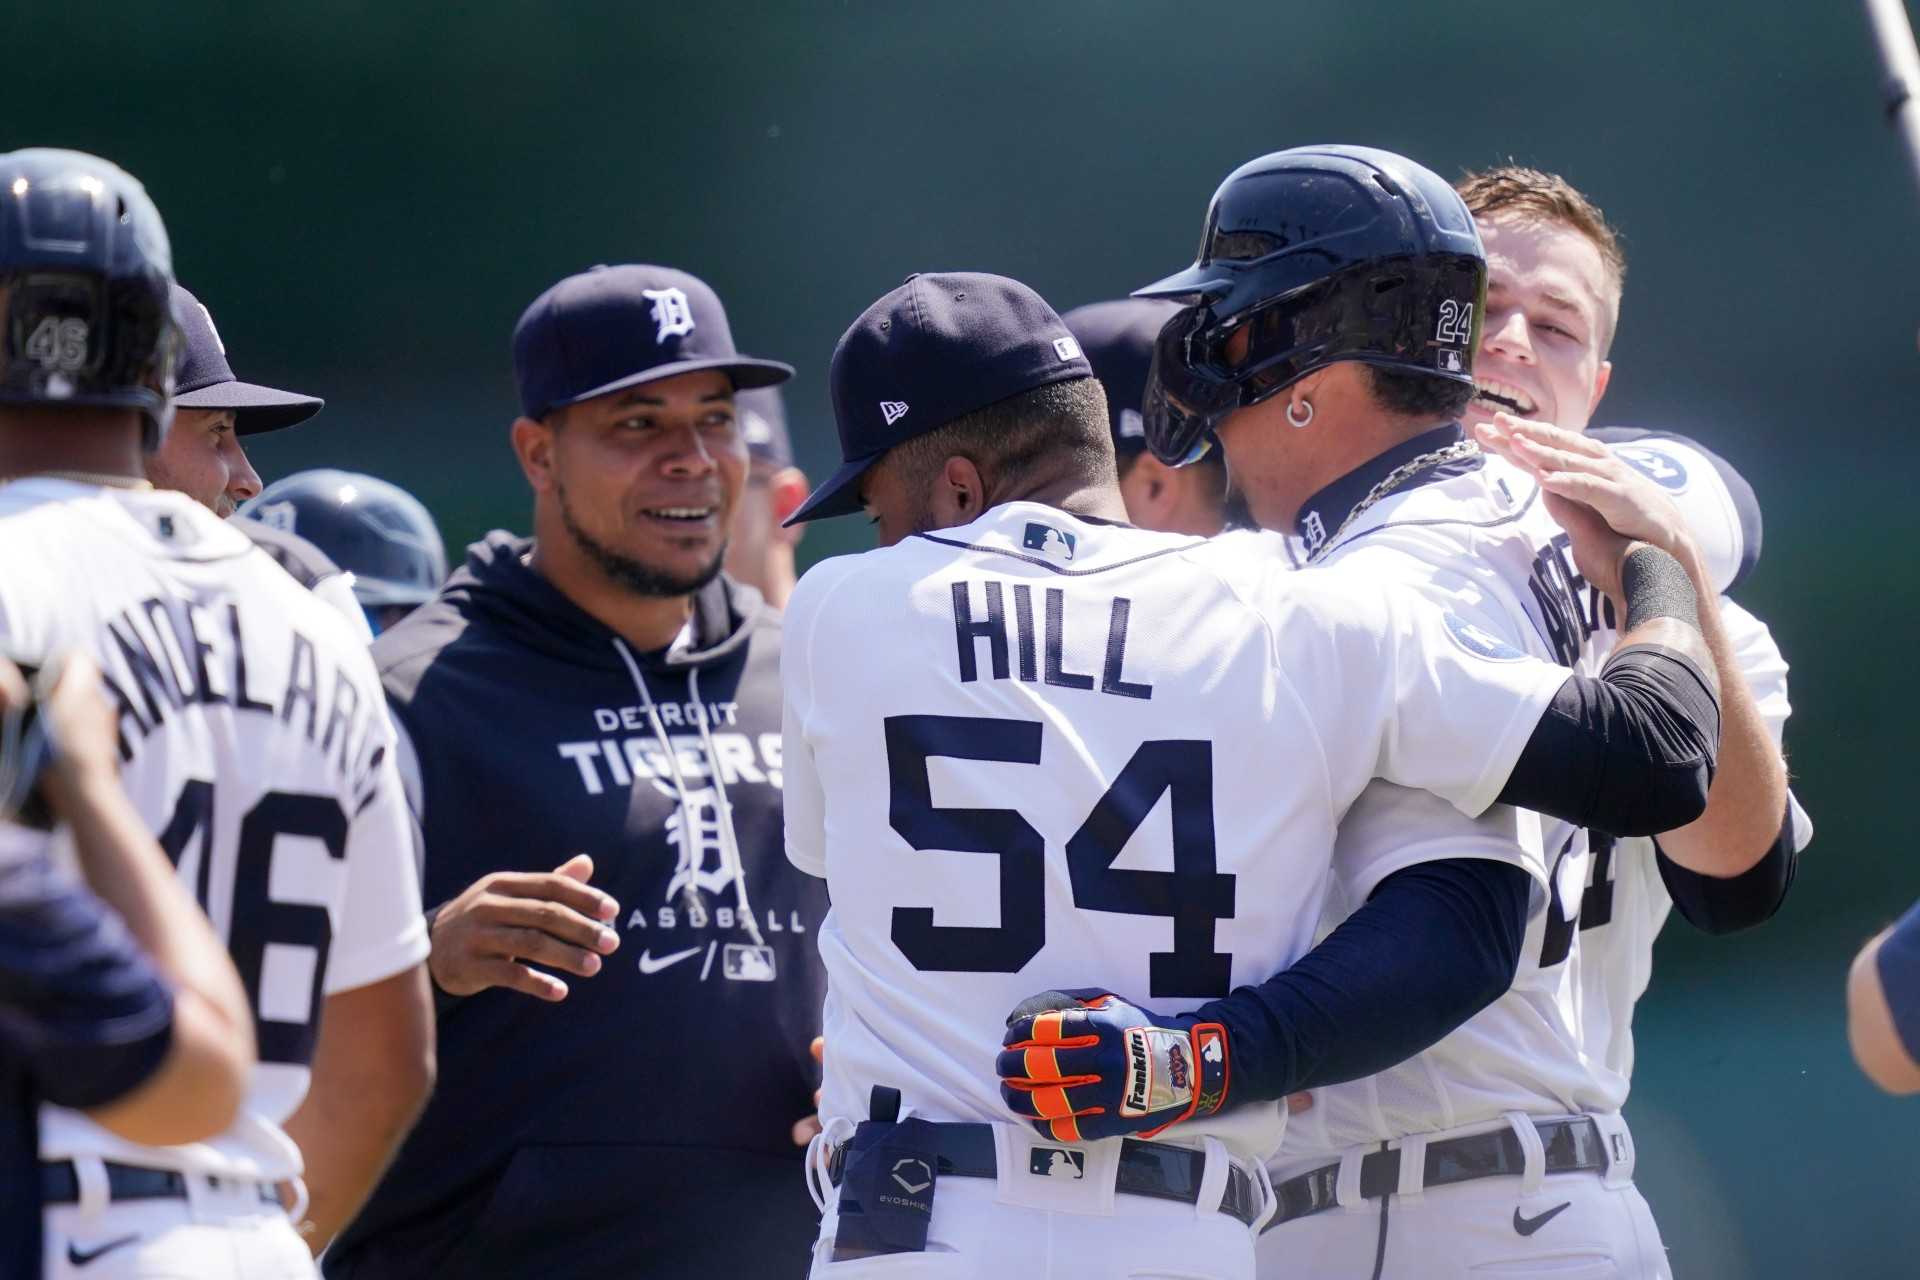 Miguel Cabrera becomes the 33rd player to join the 3,000 hits club